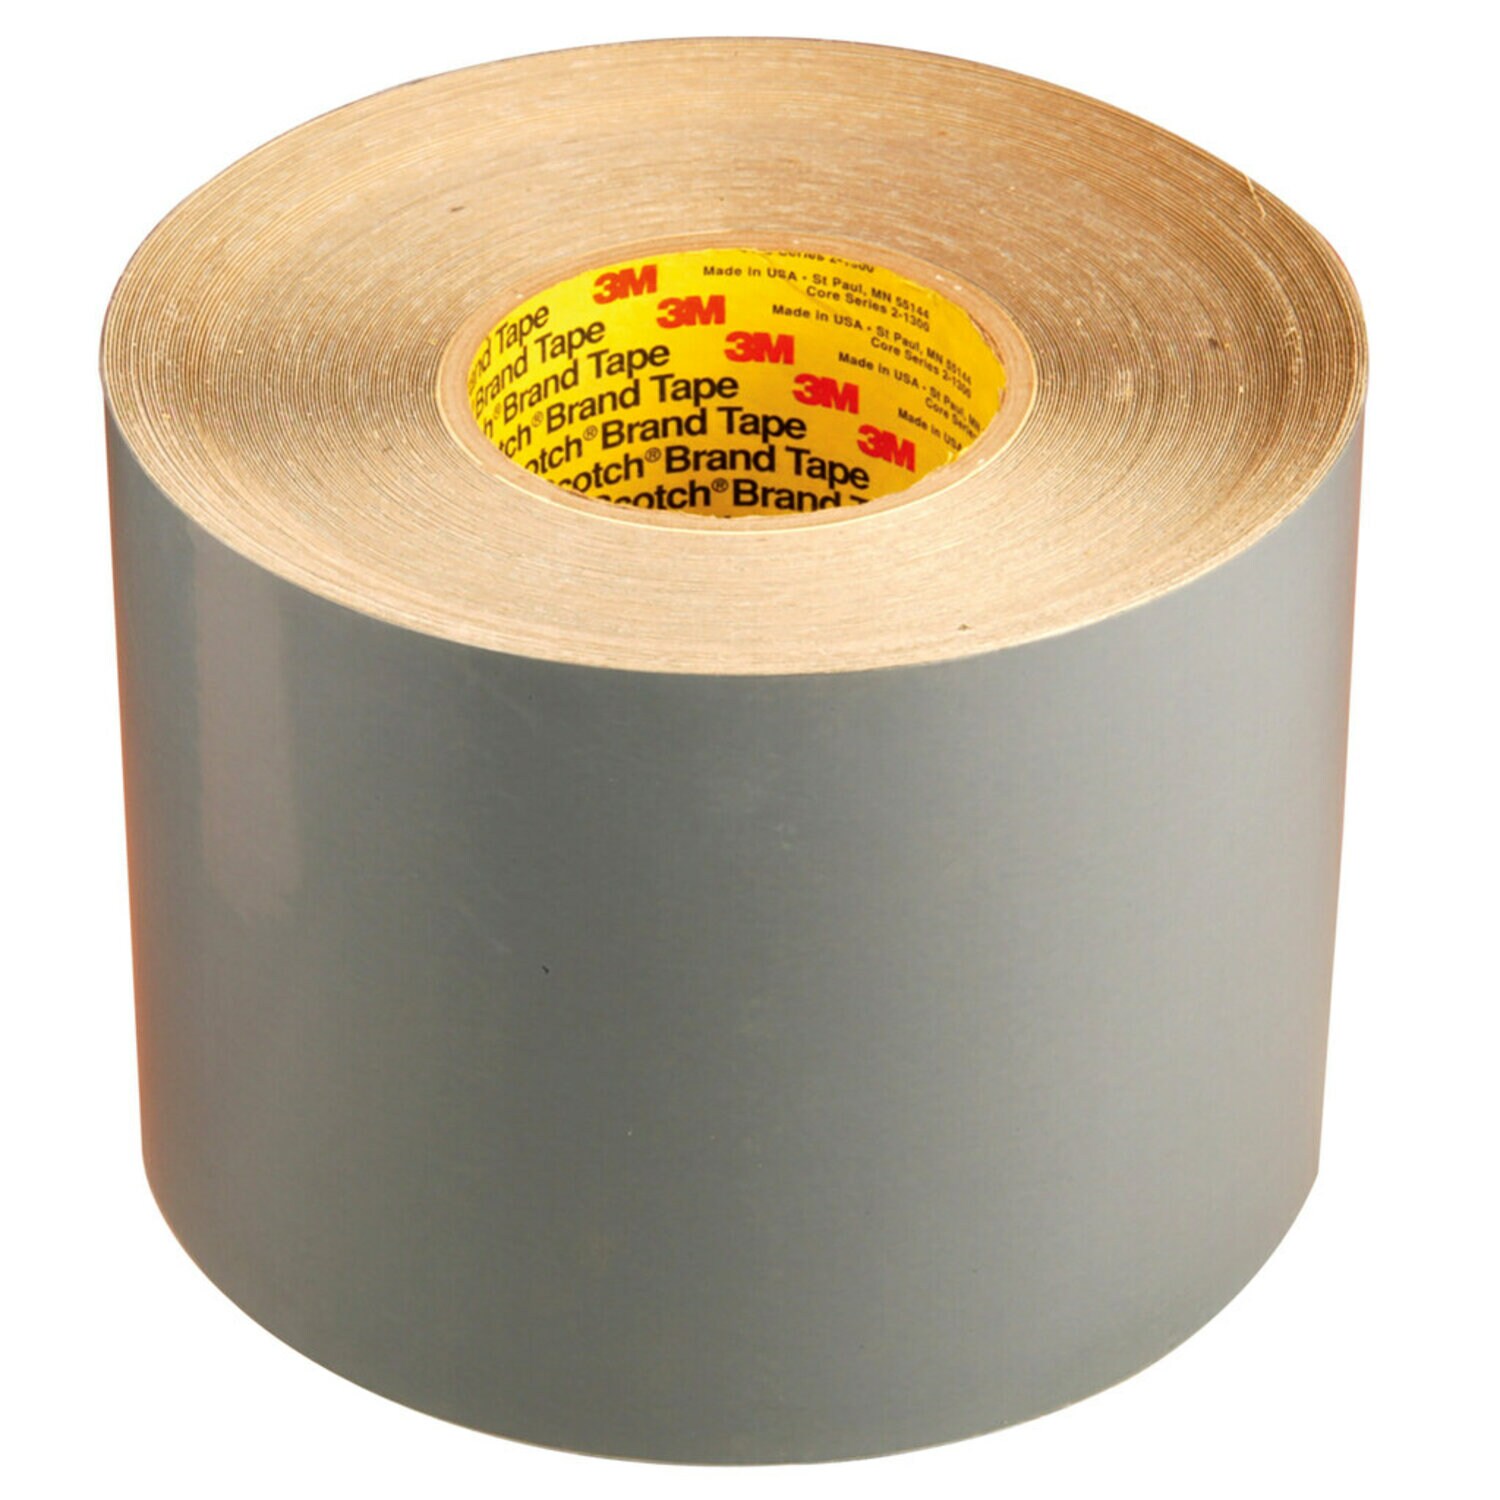 3M 600 Light Duty Packaging Tape High Clarity Adhesive Tape For Attaching  Tabbing and Holding 1 Roll 12.7/19mm*33m